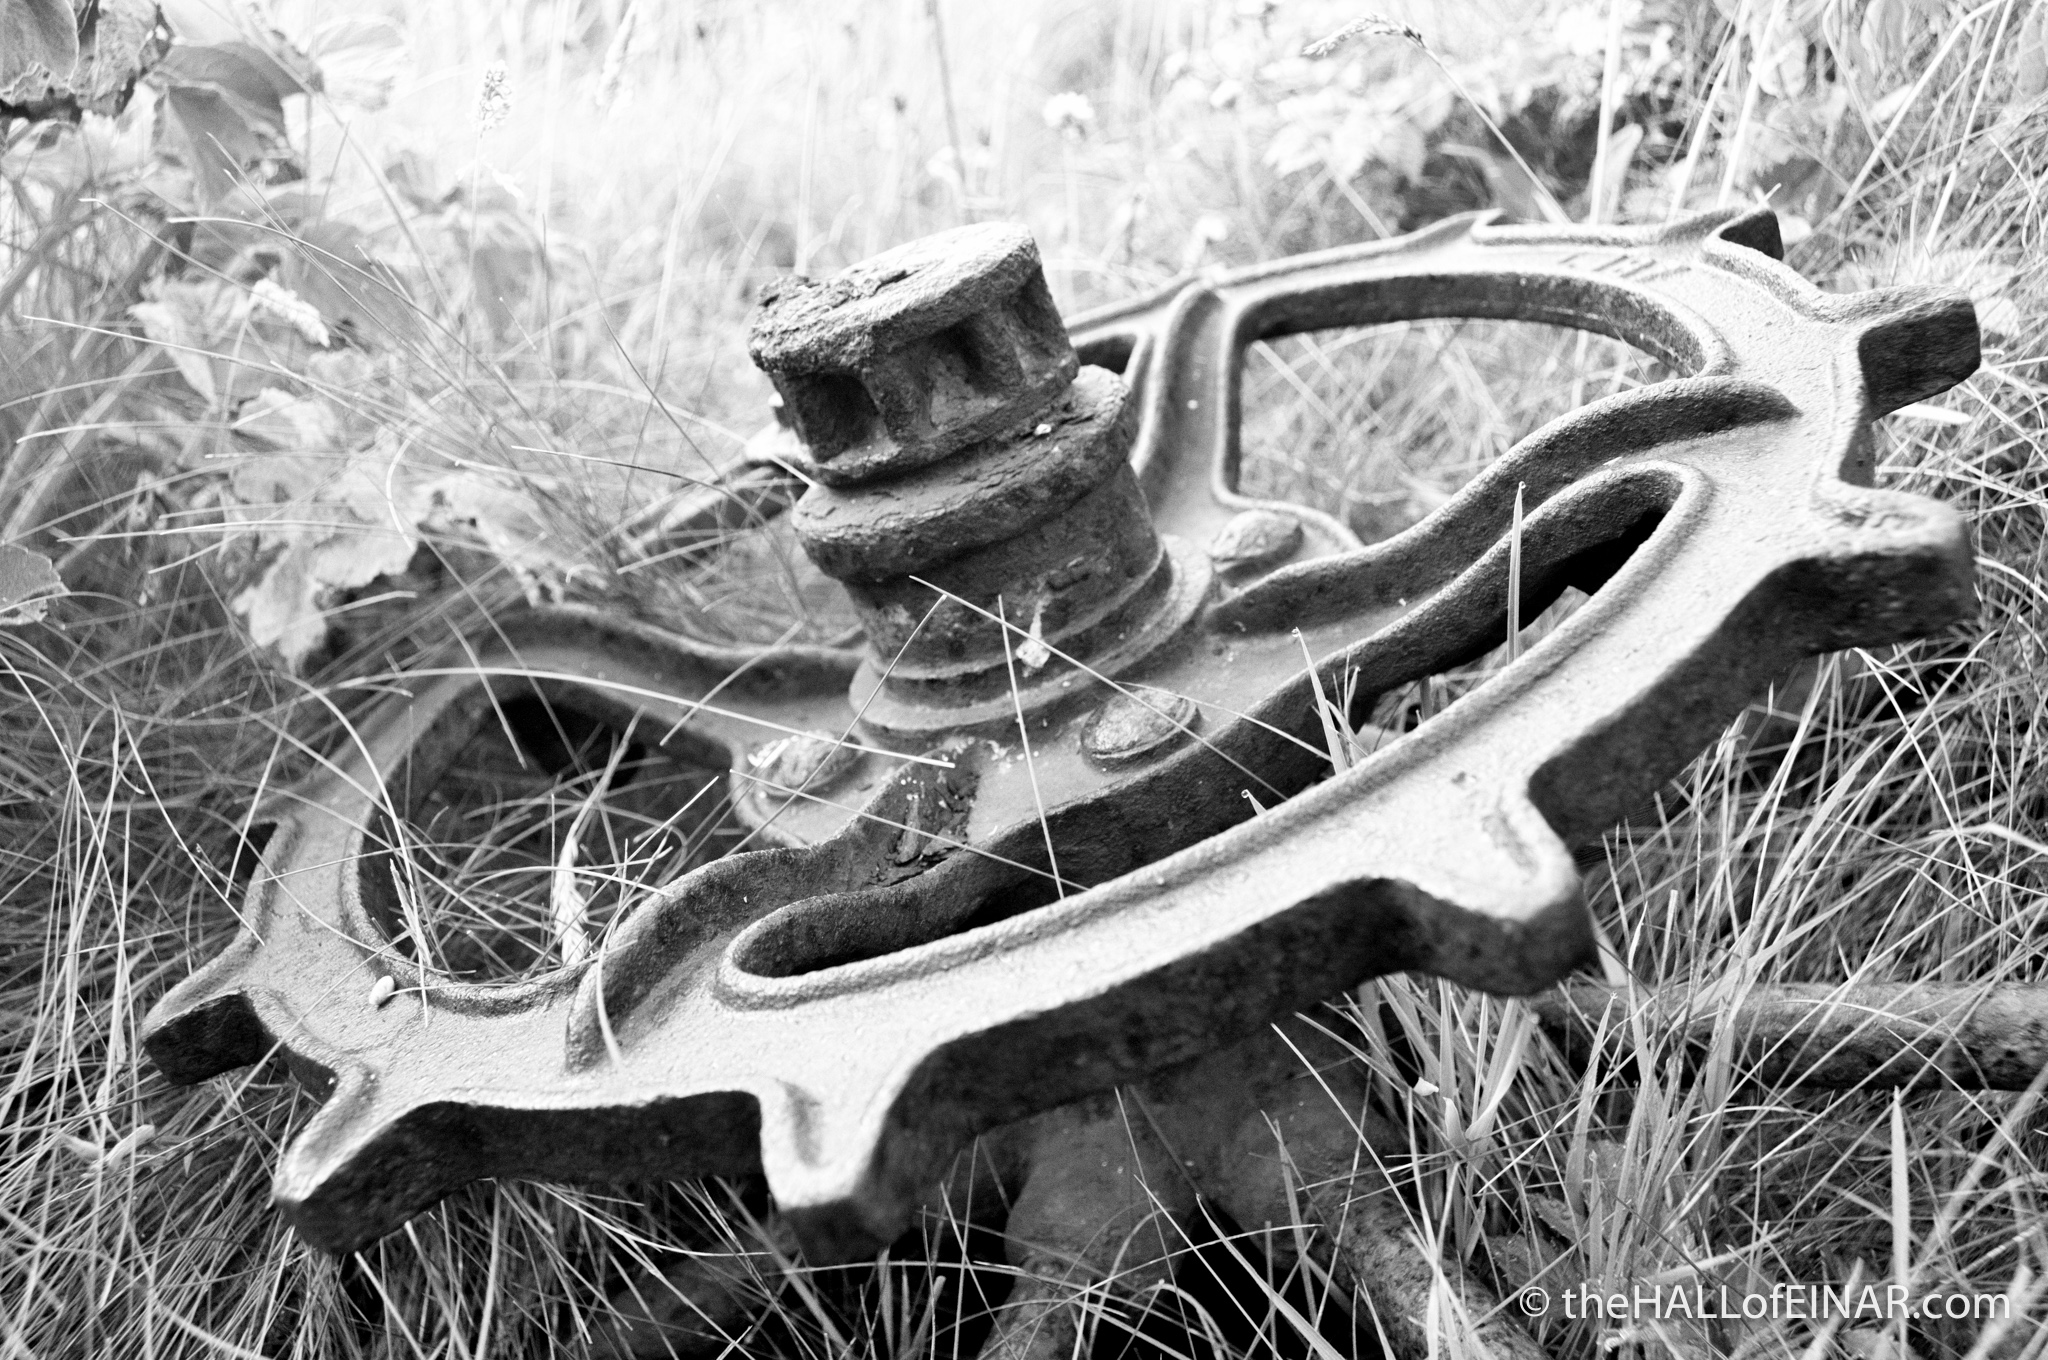 Rusting in the grass - photograph (c) 2016 David Bailey (not the)